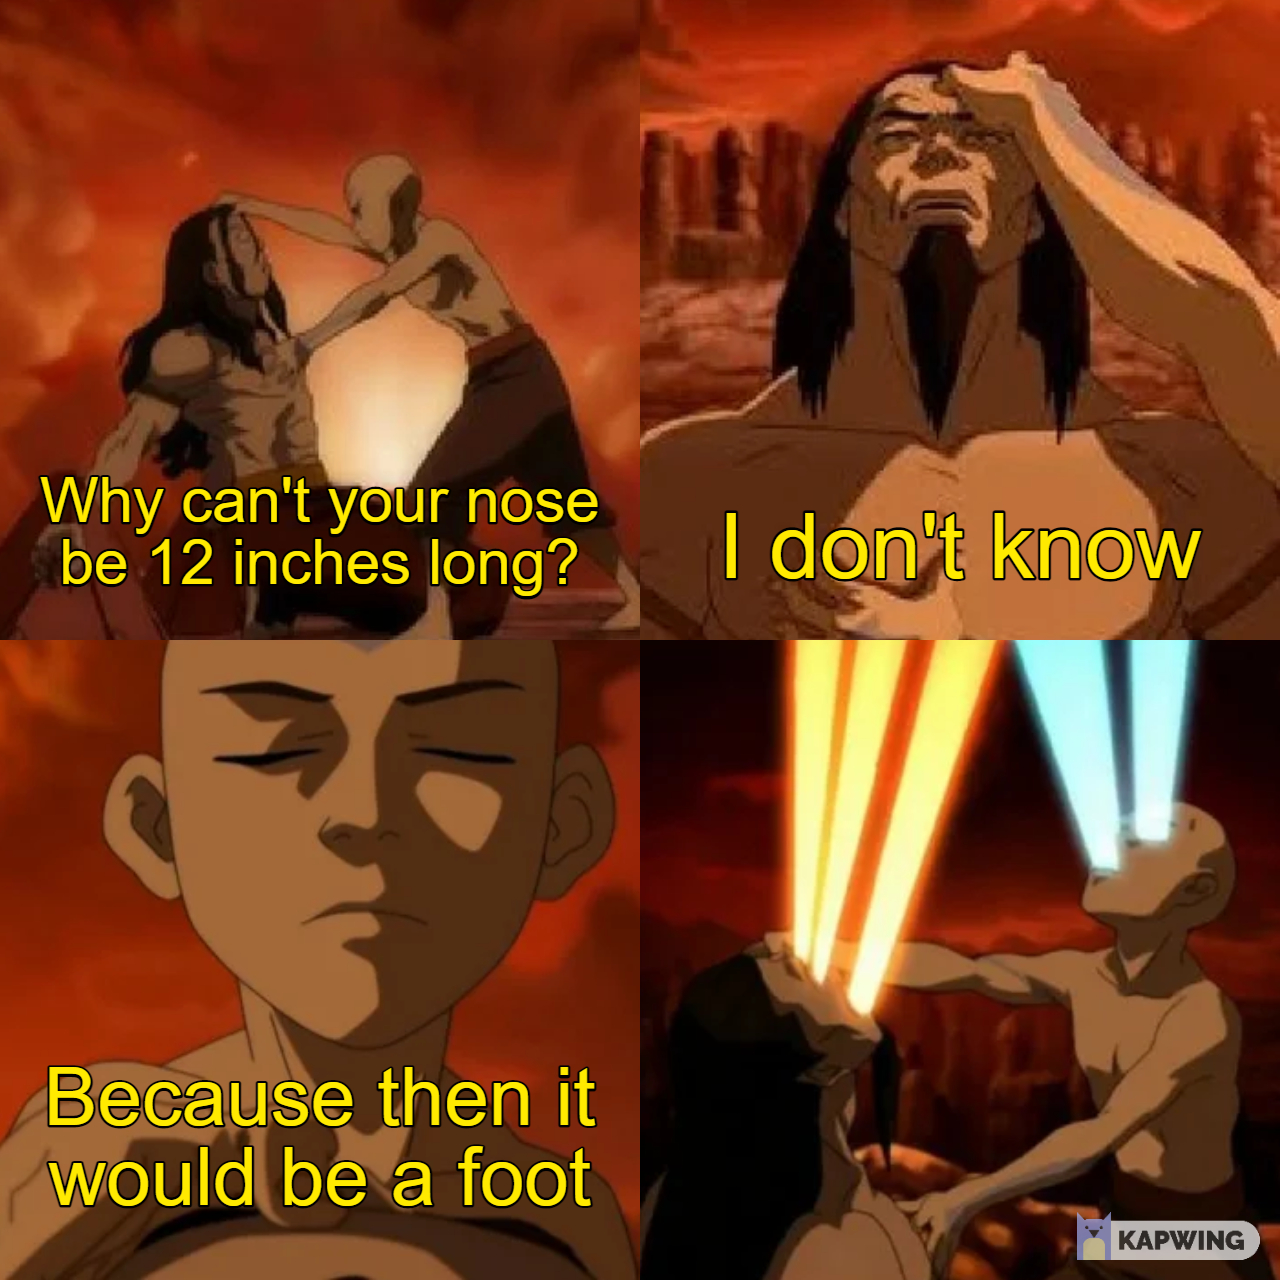 Oh! In that case, I have 3 feet